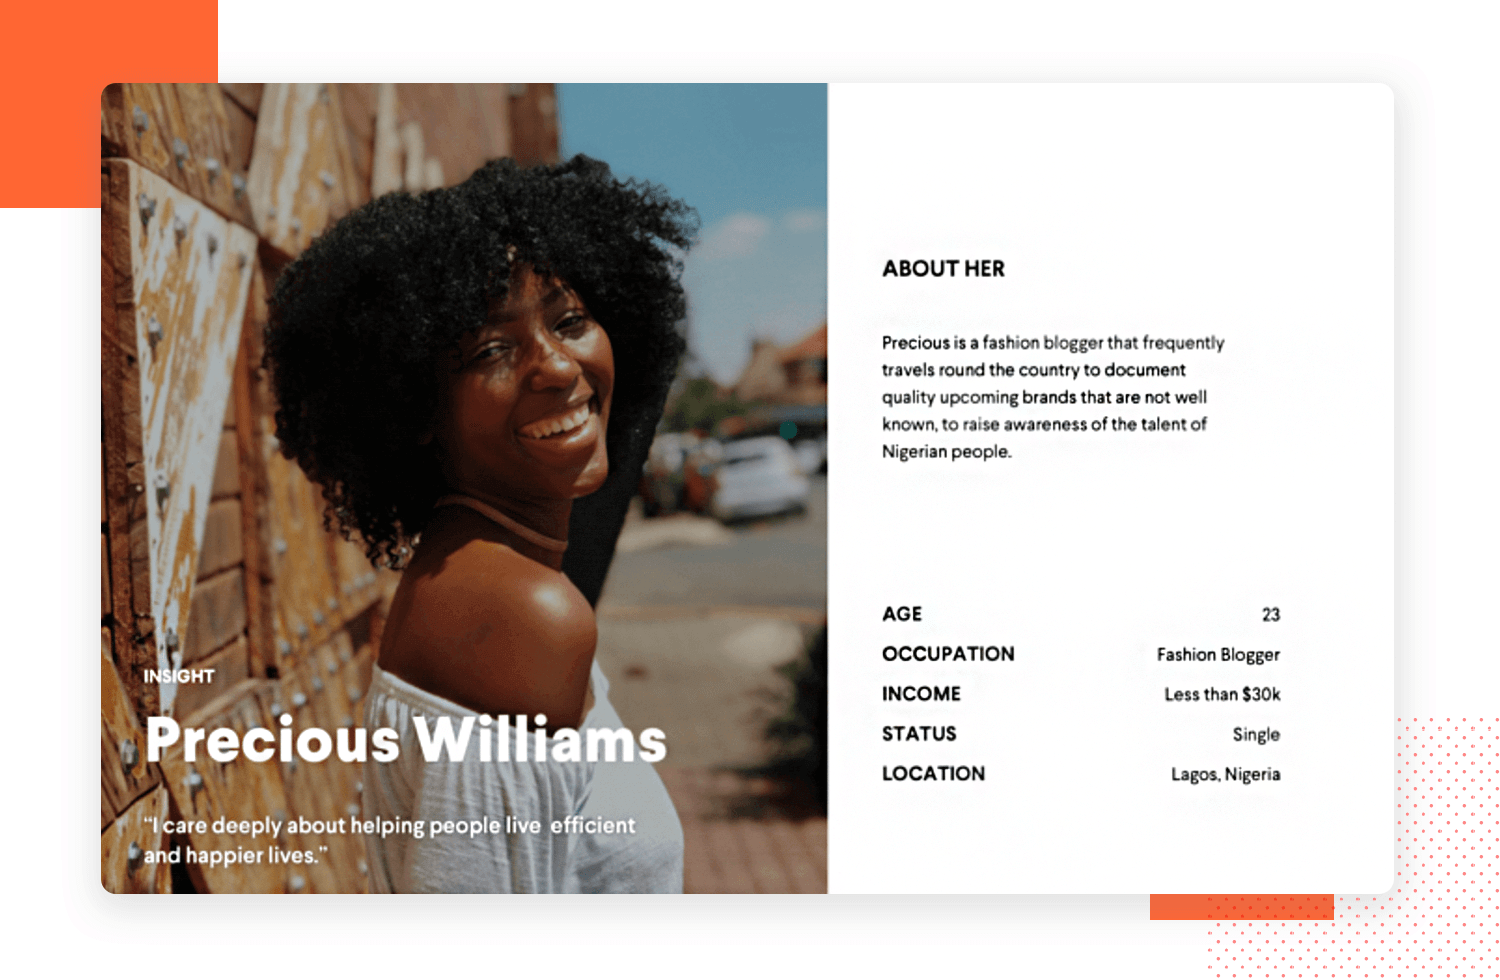 User persona template examples - fashion blogger